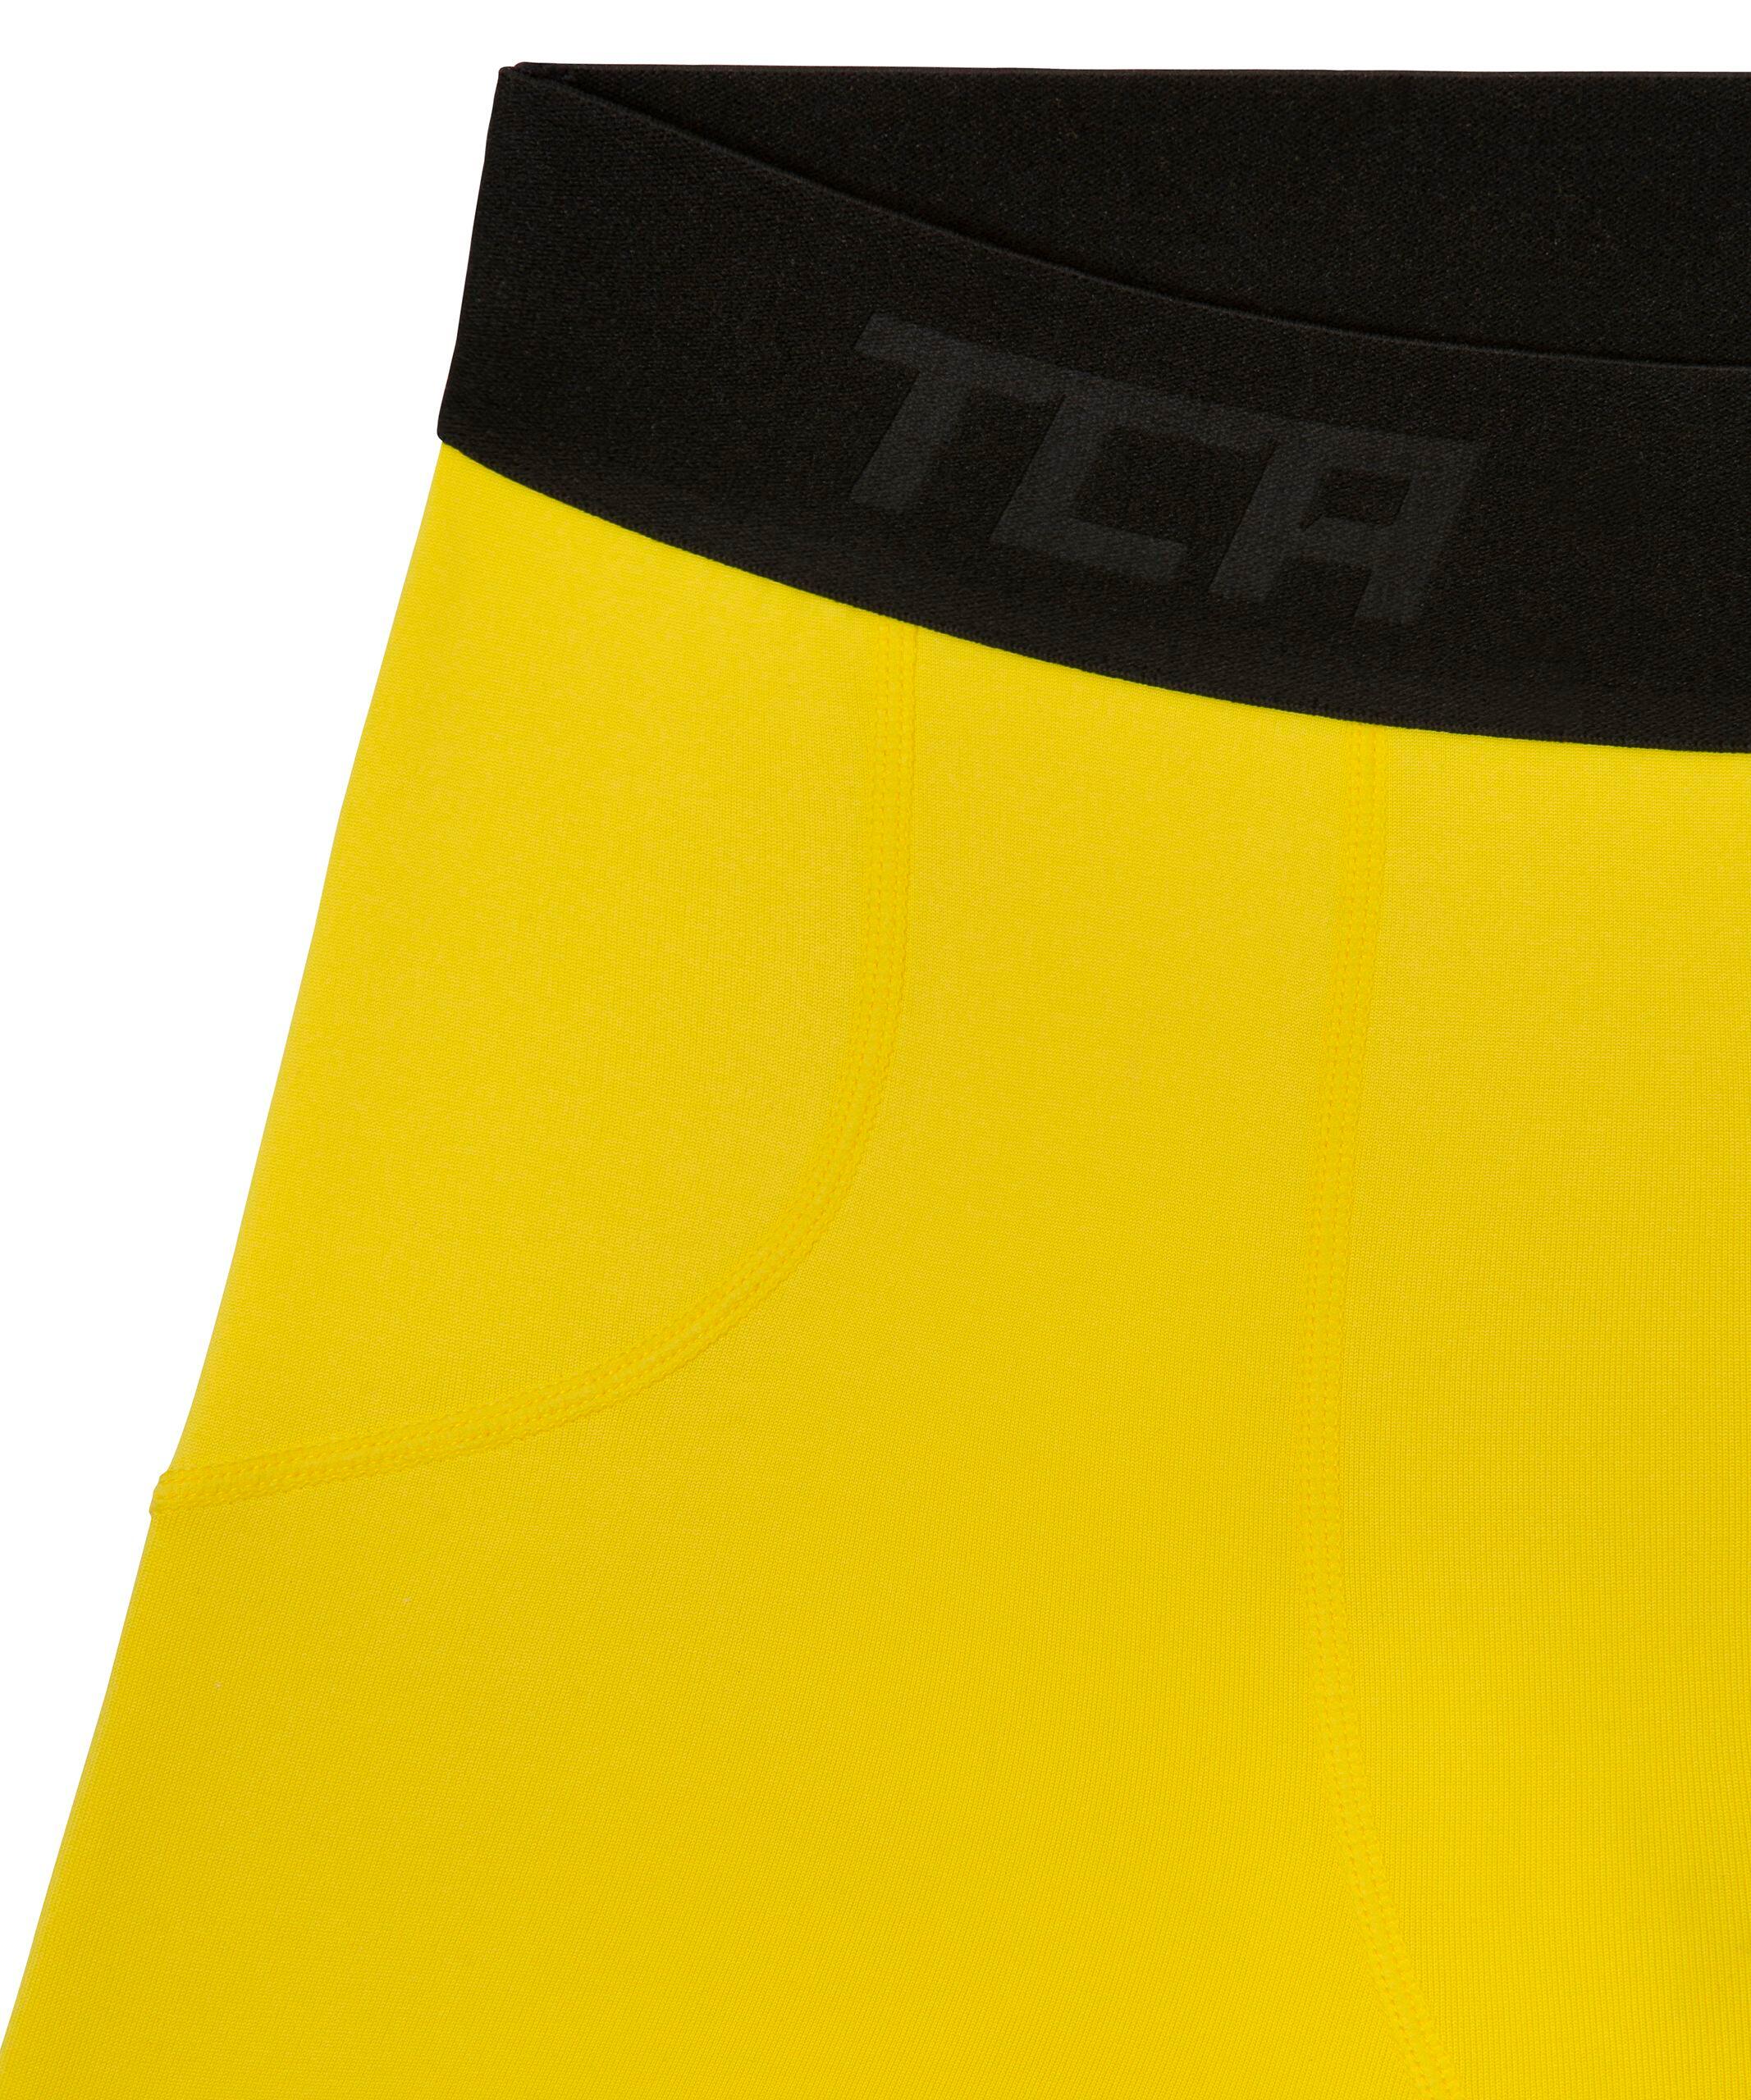 Boys' Super Thermal Compression Shorts - Sonic Yellow 5/5